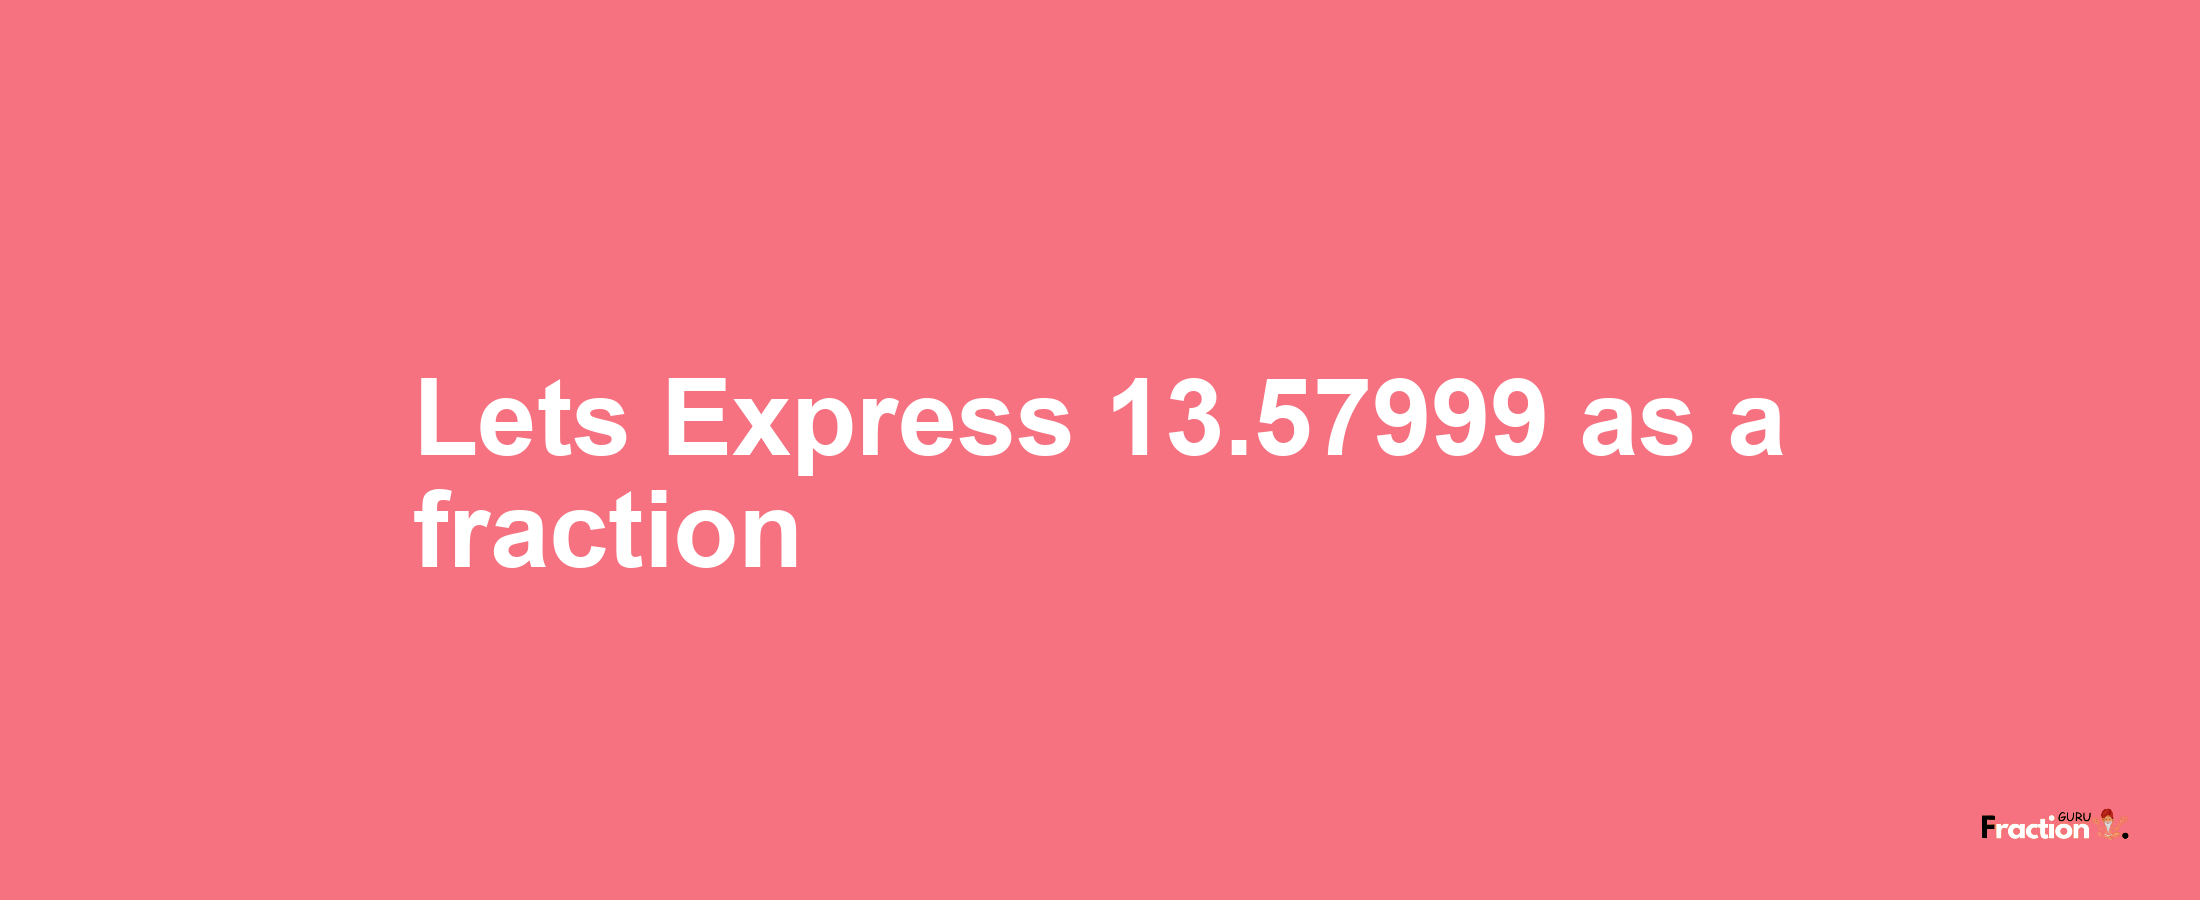 Lets Express 13.57999 as afraction